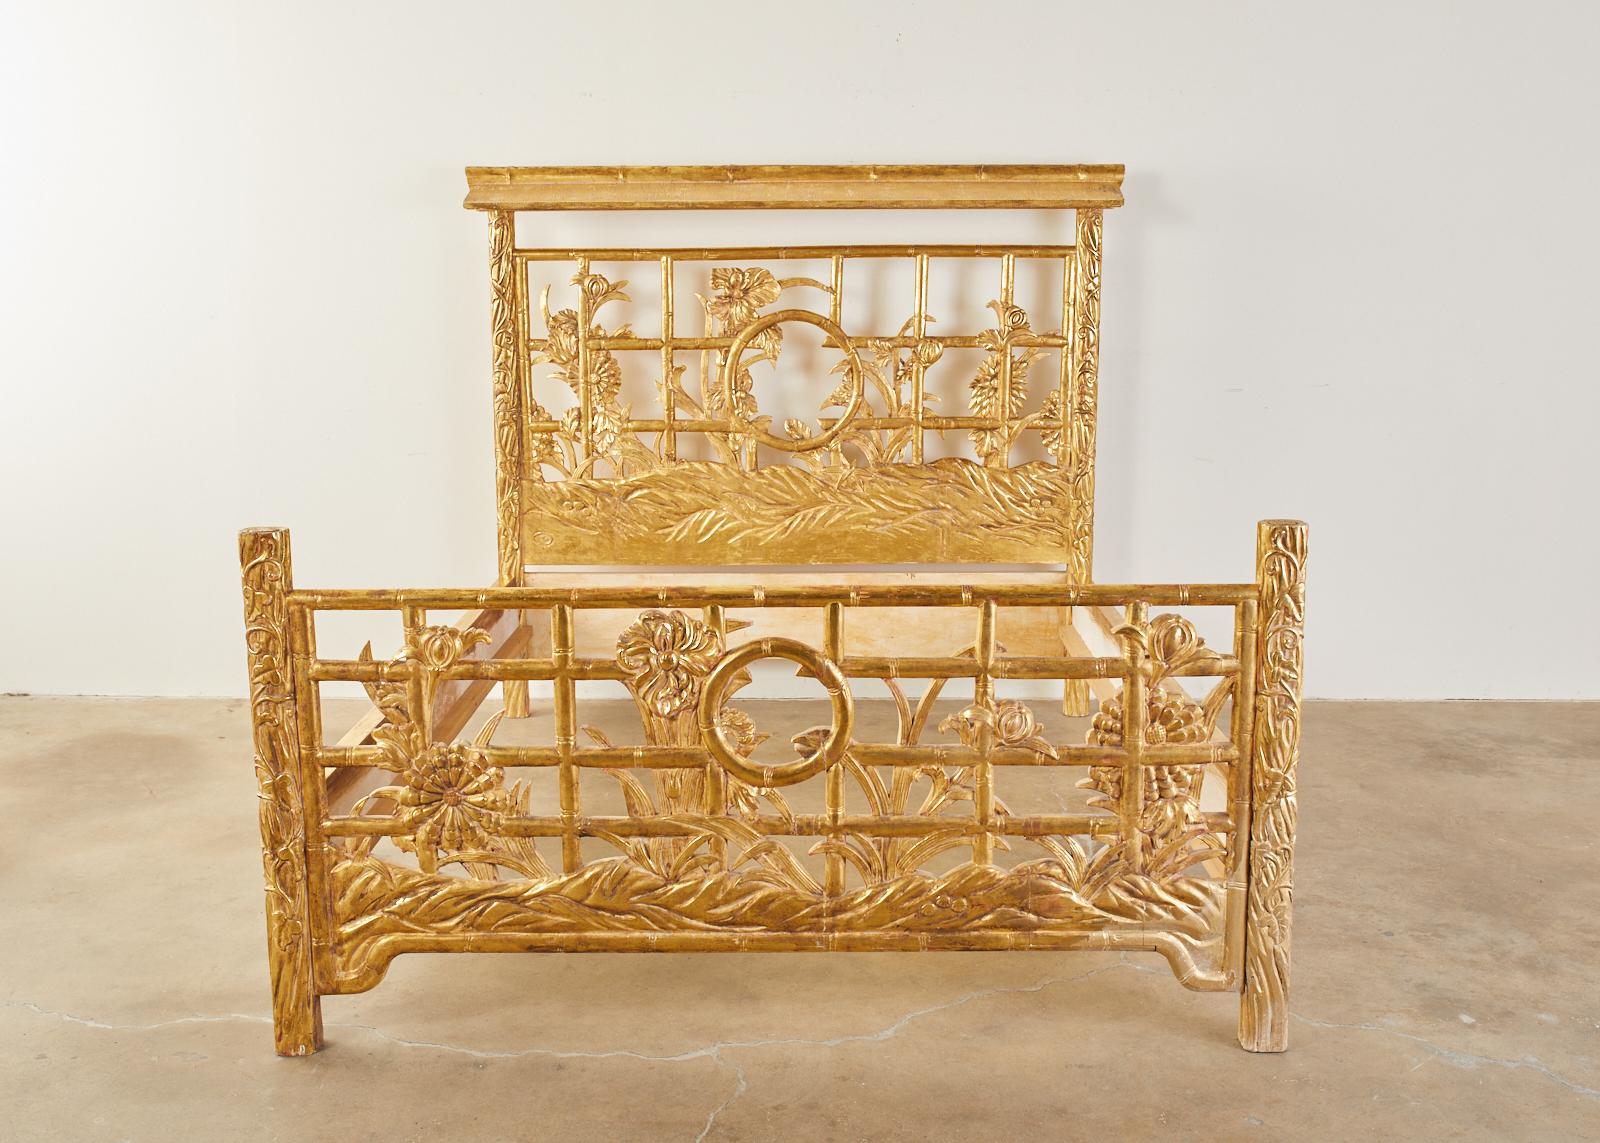 Fantastic midcentury faux bamboo giltwood bed from the Hollywood Regency period. Features an open fretwork design of faux bamboo on the head and baseboard with floral and foliate growing through the lattice. The headboard has a pagoda roof fragment